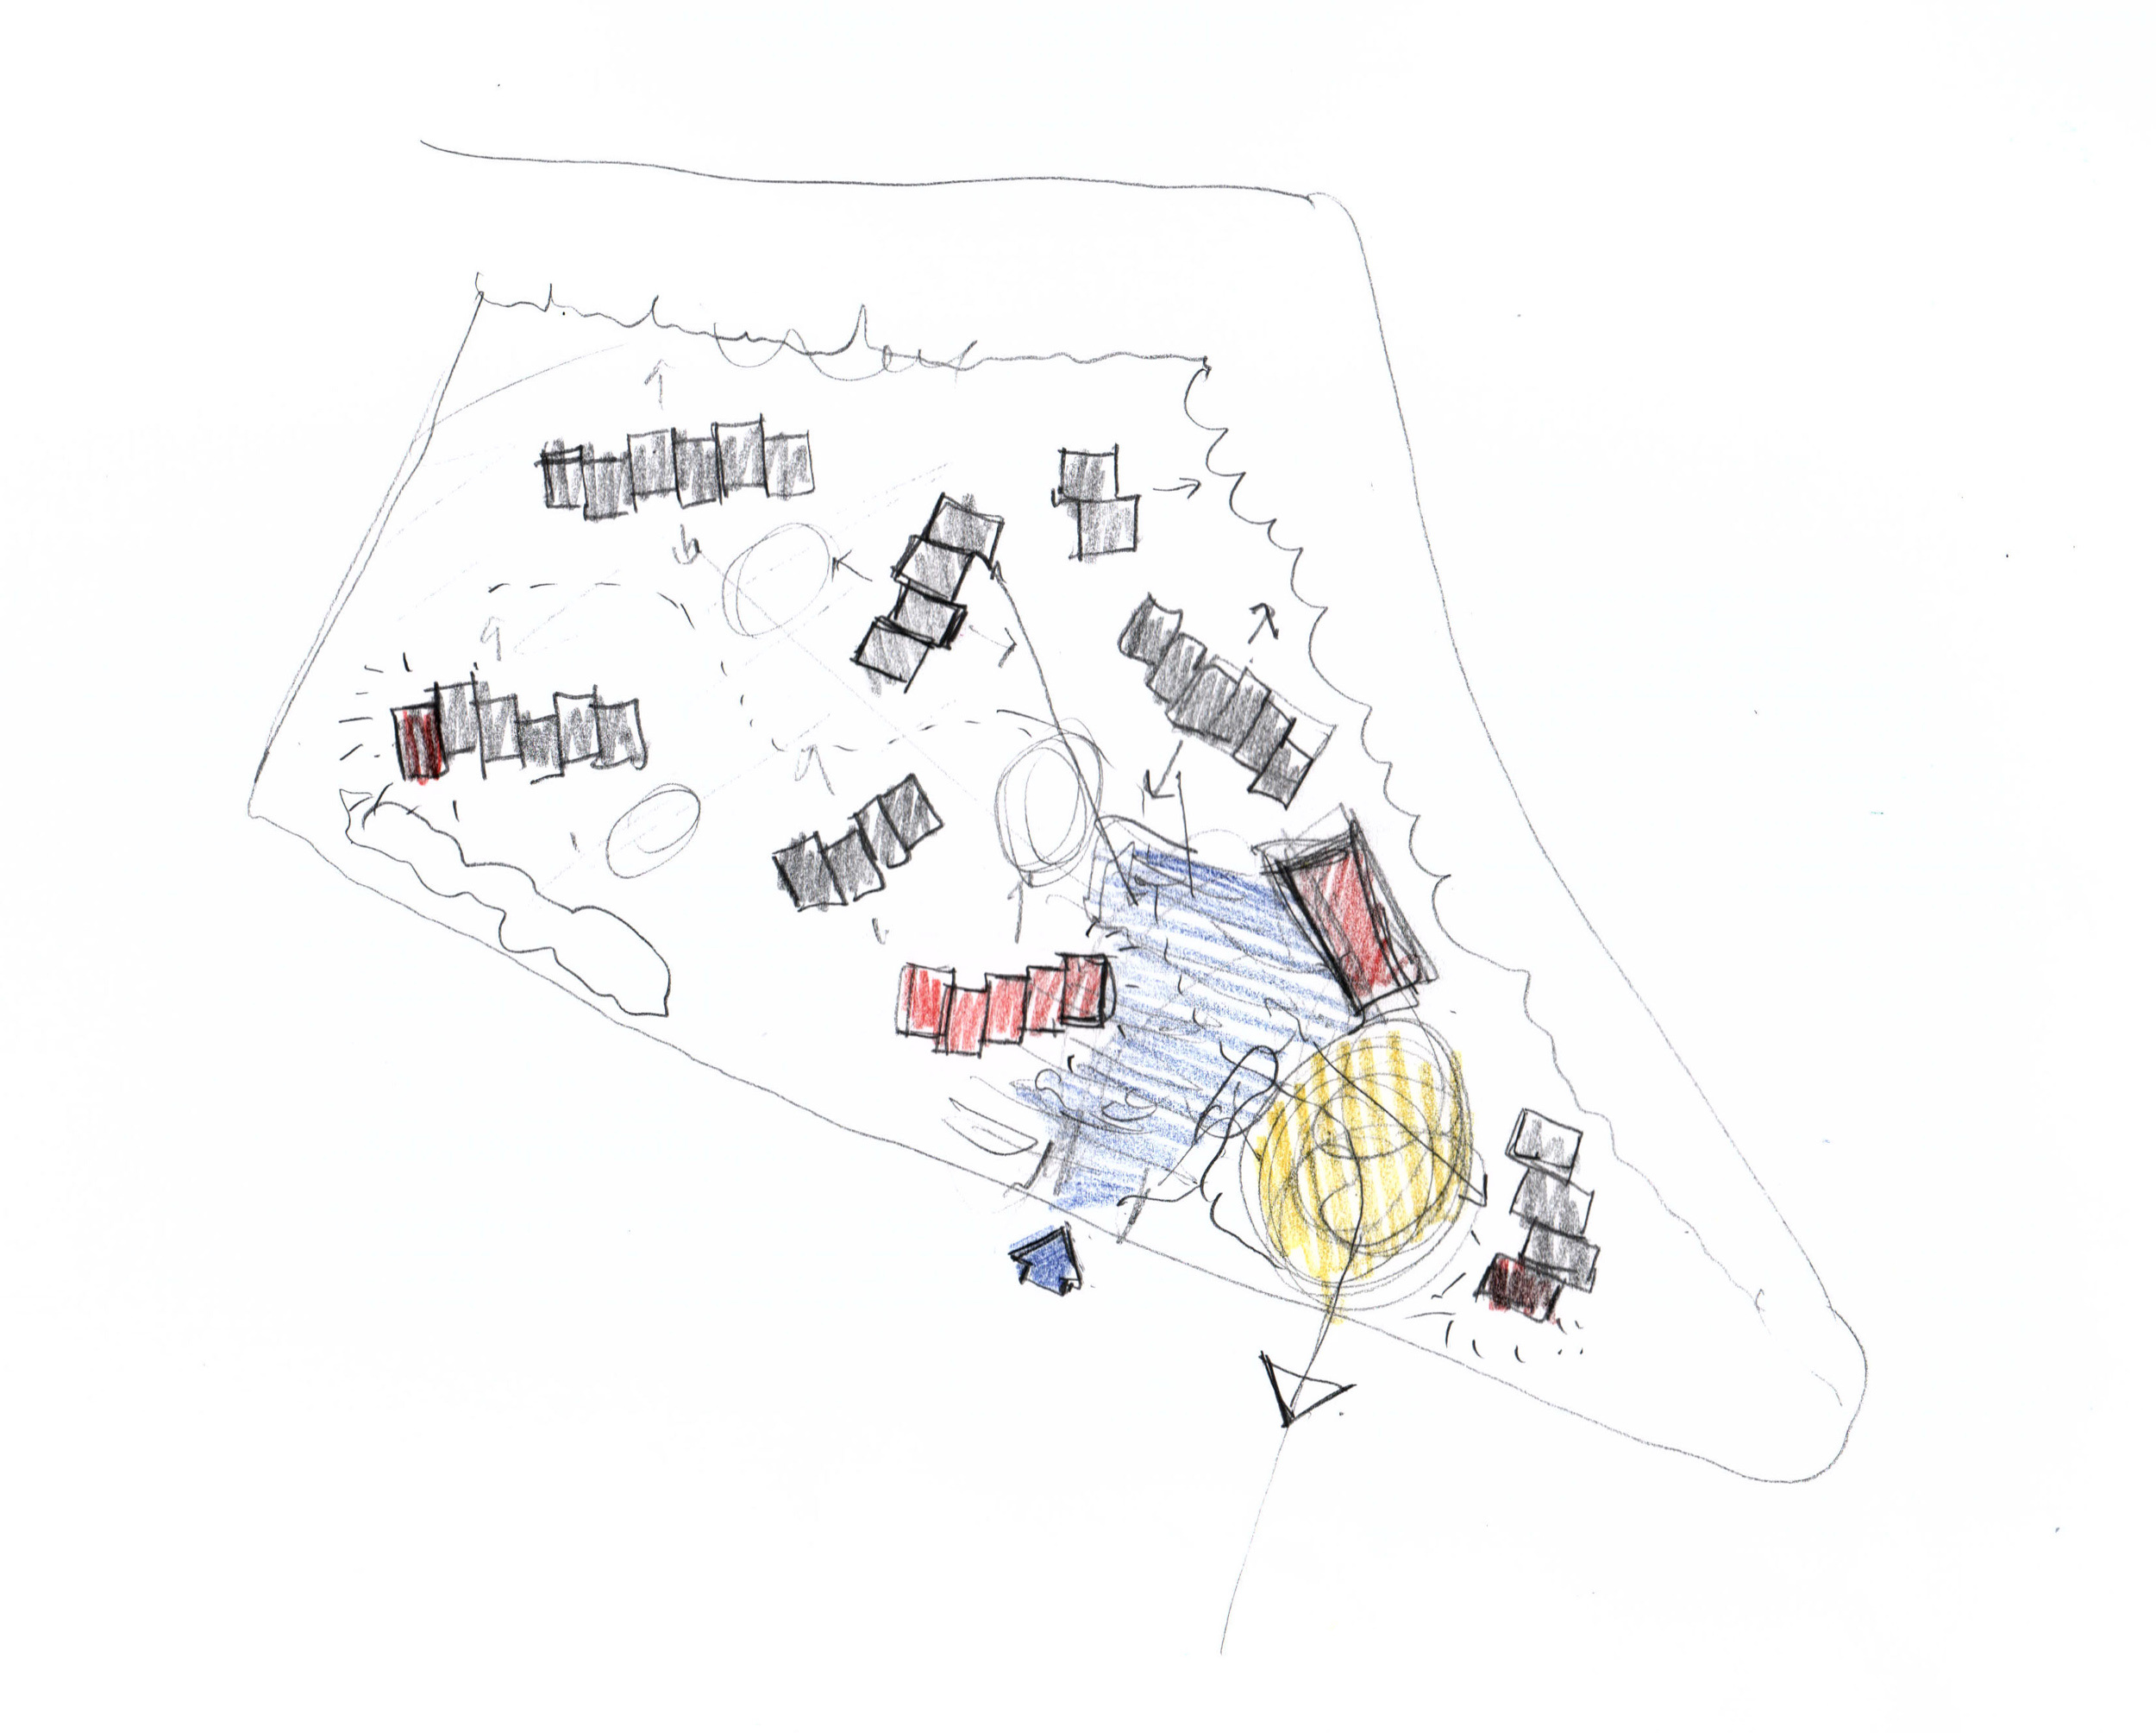 Early landscape plan for positioning of housing clusters